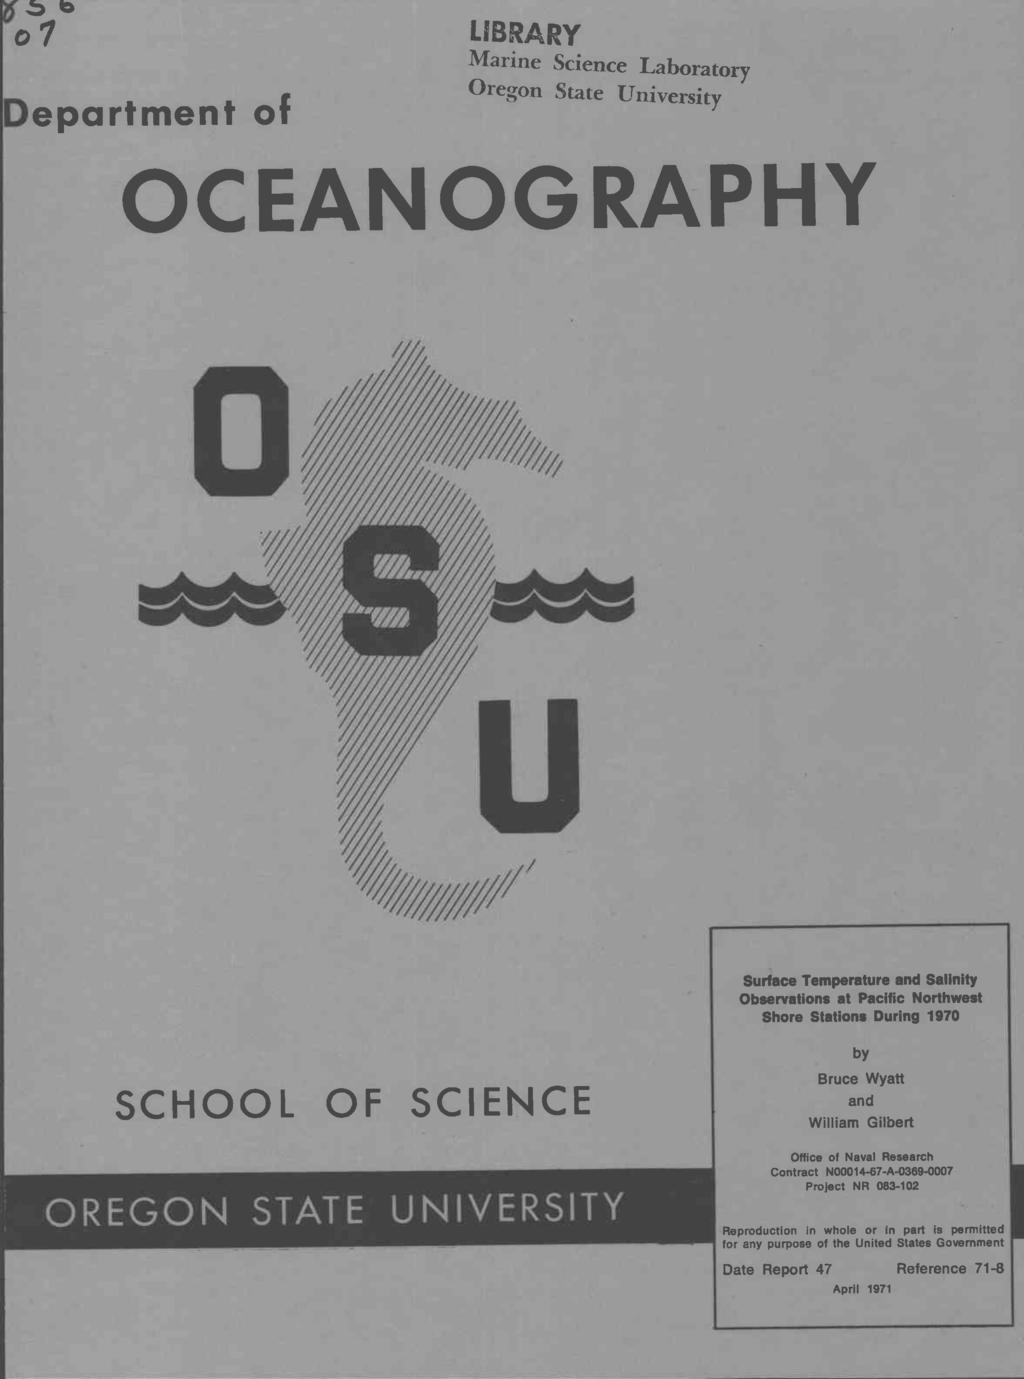 a 01 Department of LIBRARY Marine Science Laboratory Oregon State University OCEANOGRAPHY 0/17 Surface Temperature and Salinity Observations at Pacific Northwest Shore Stations During 1970 by SCHOOL